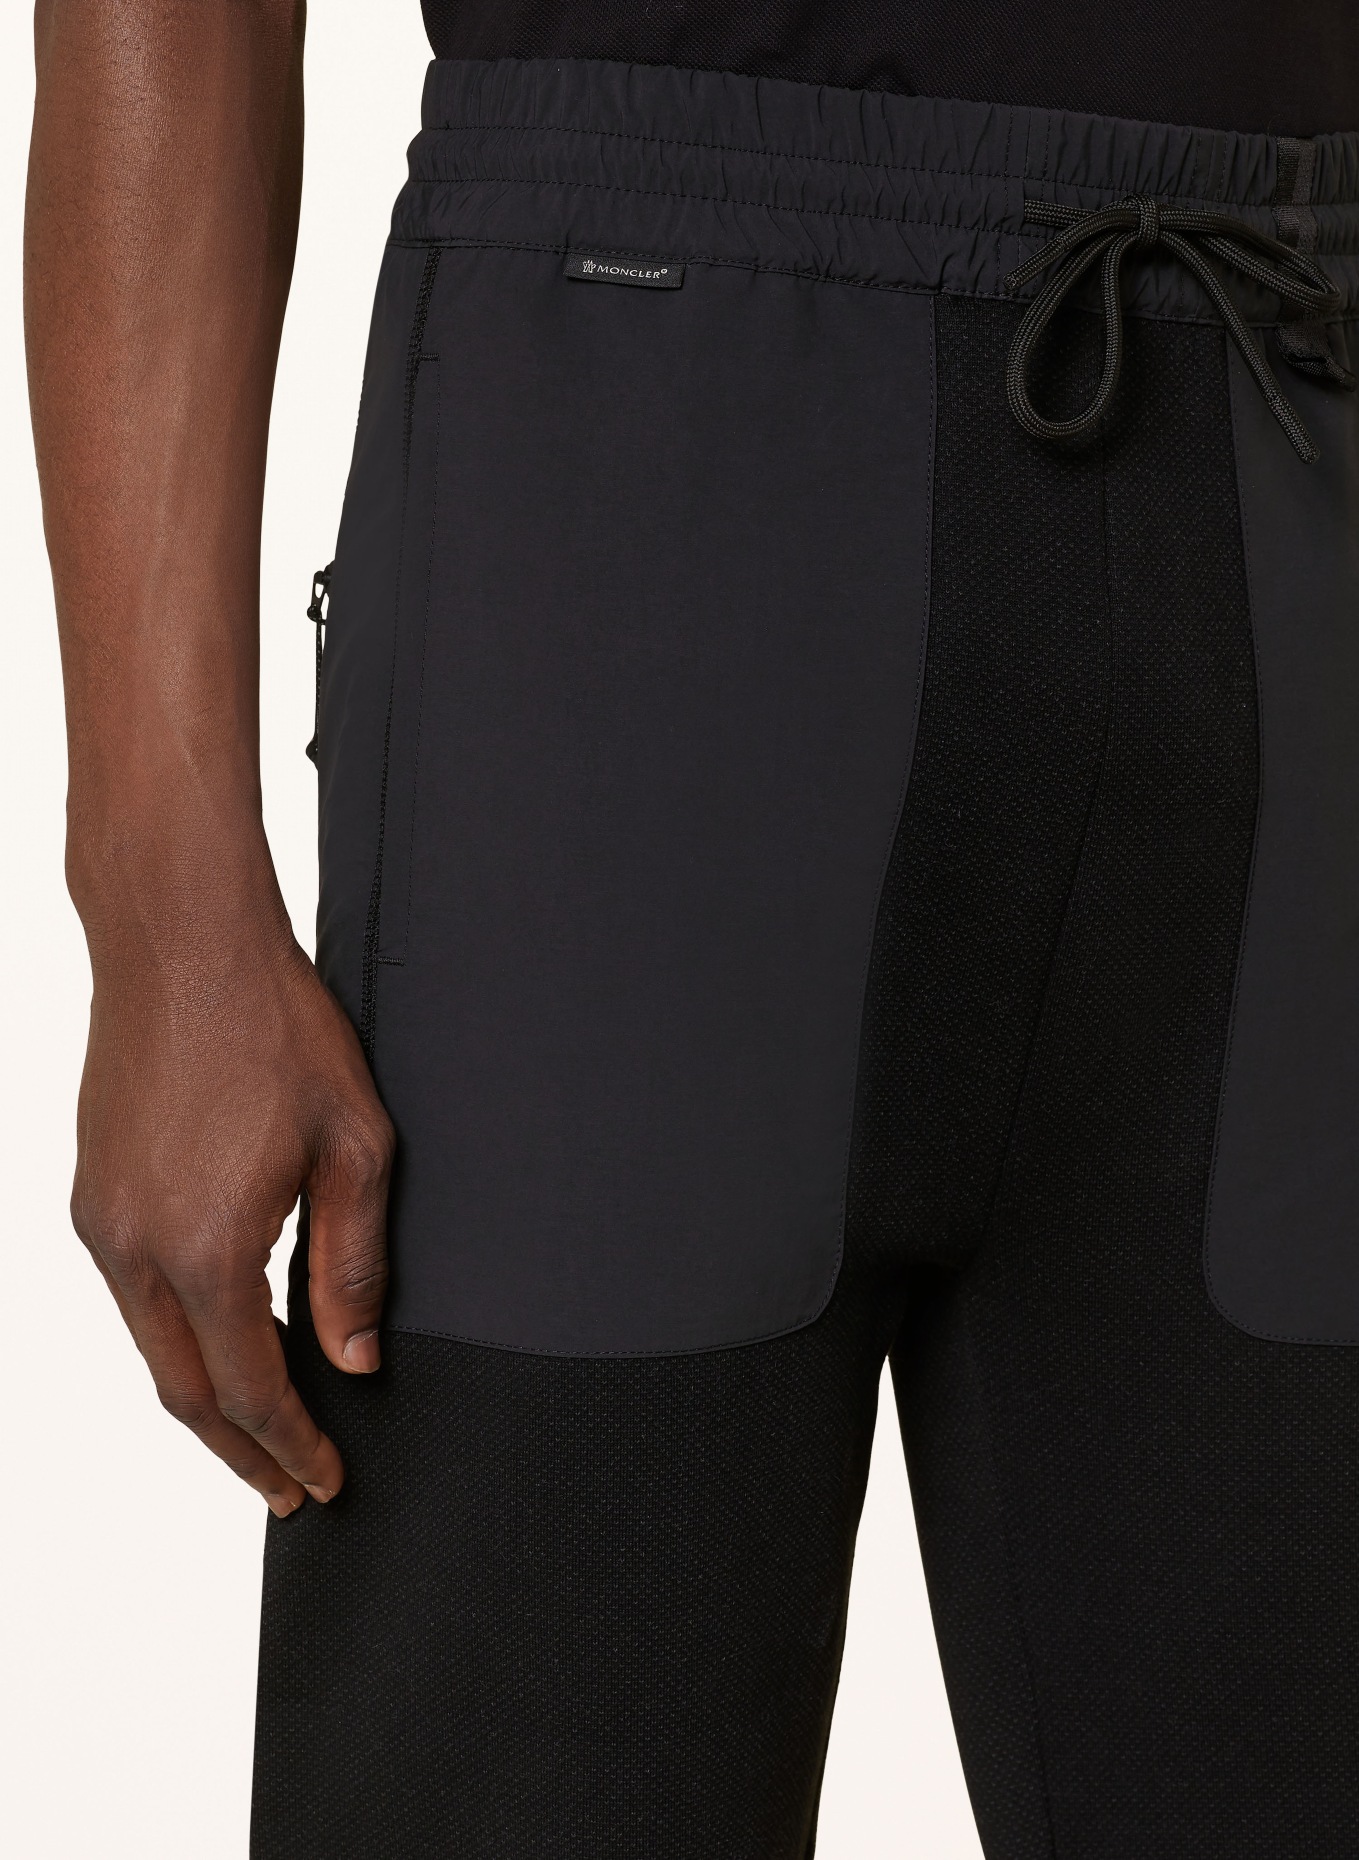 MONCLER Pants in jogger style, Color: BLACK (Image 5)